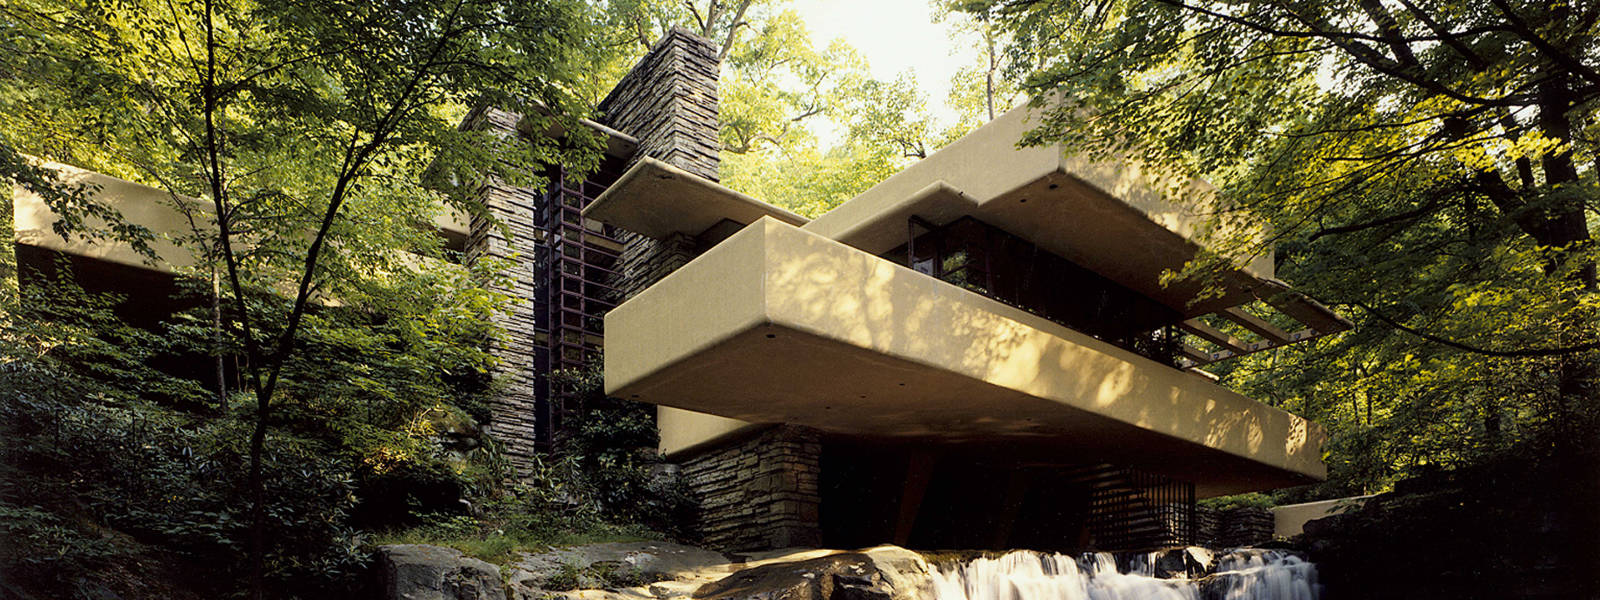 What is Fallingwater?